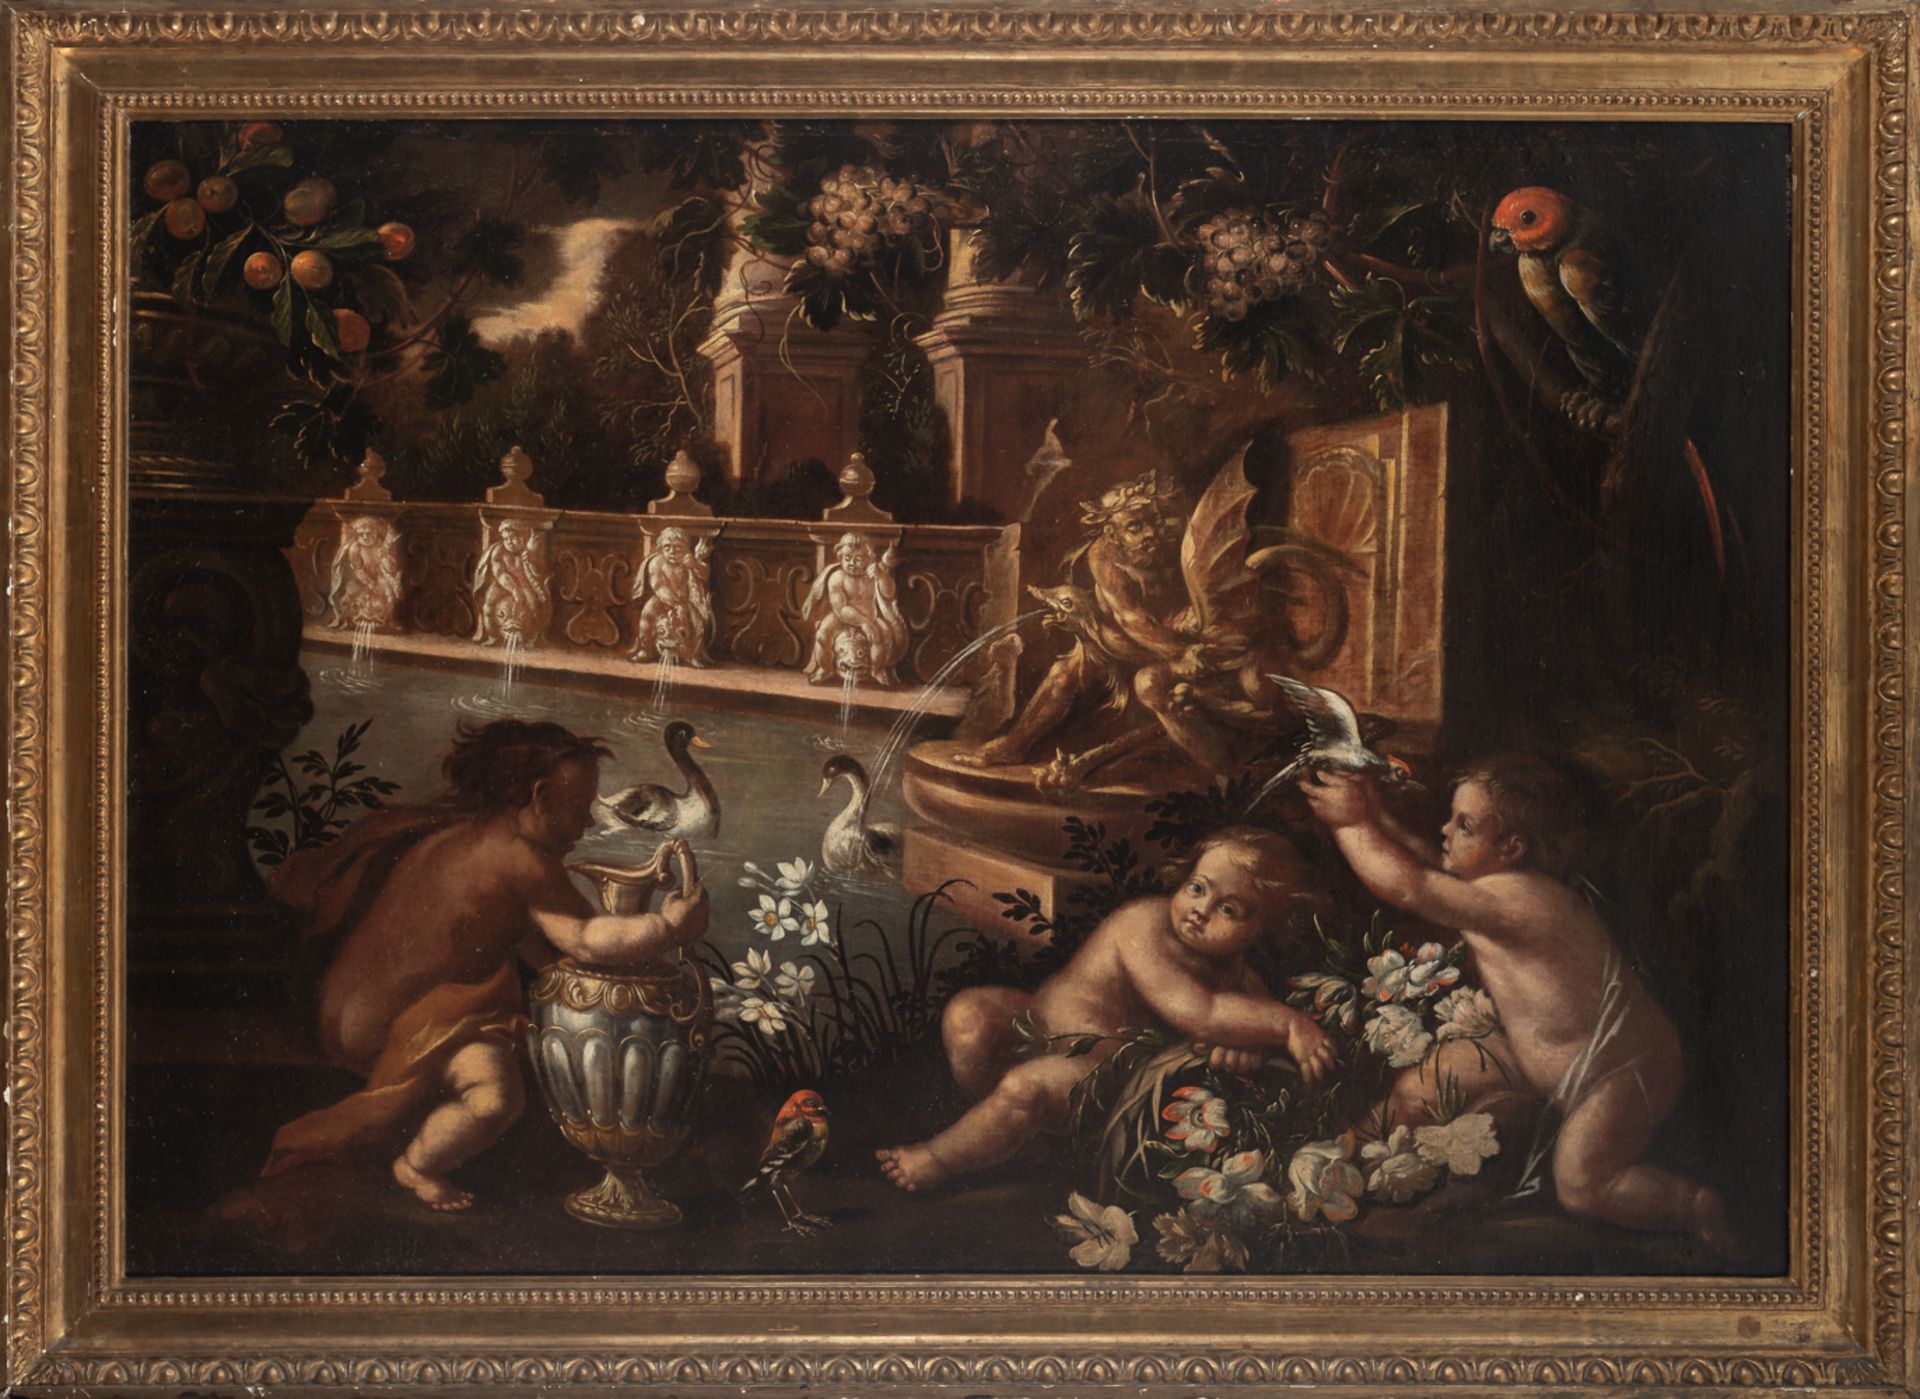 Italian school, 17th century. Garden with fountain and cupids. 